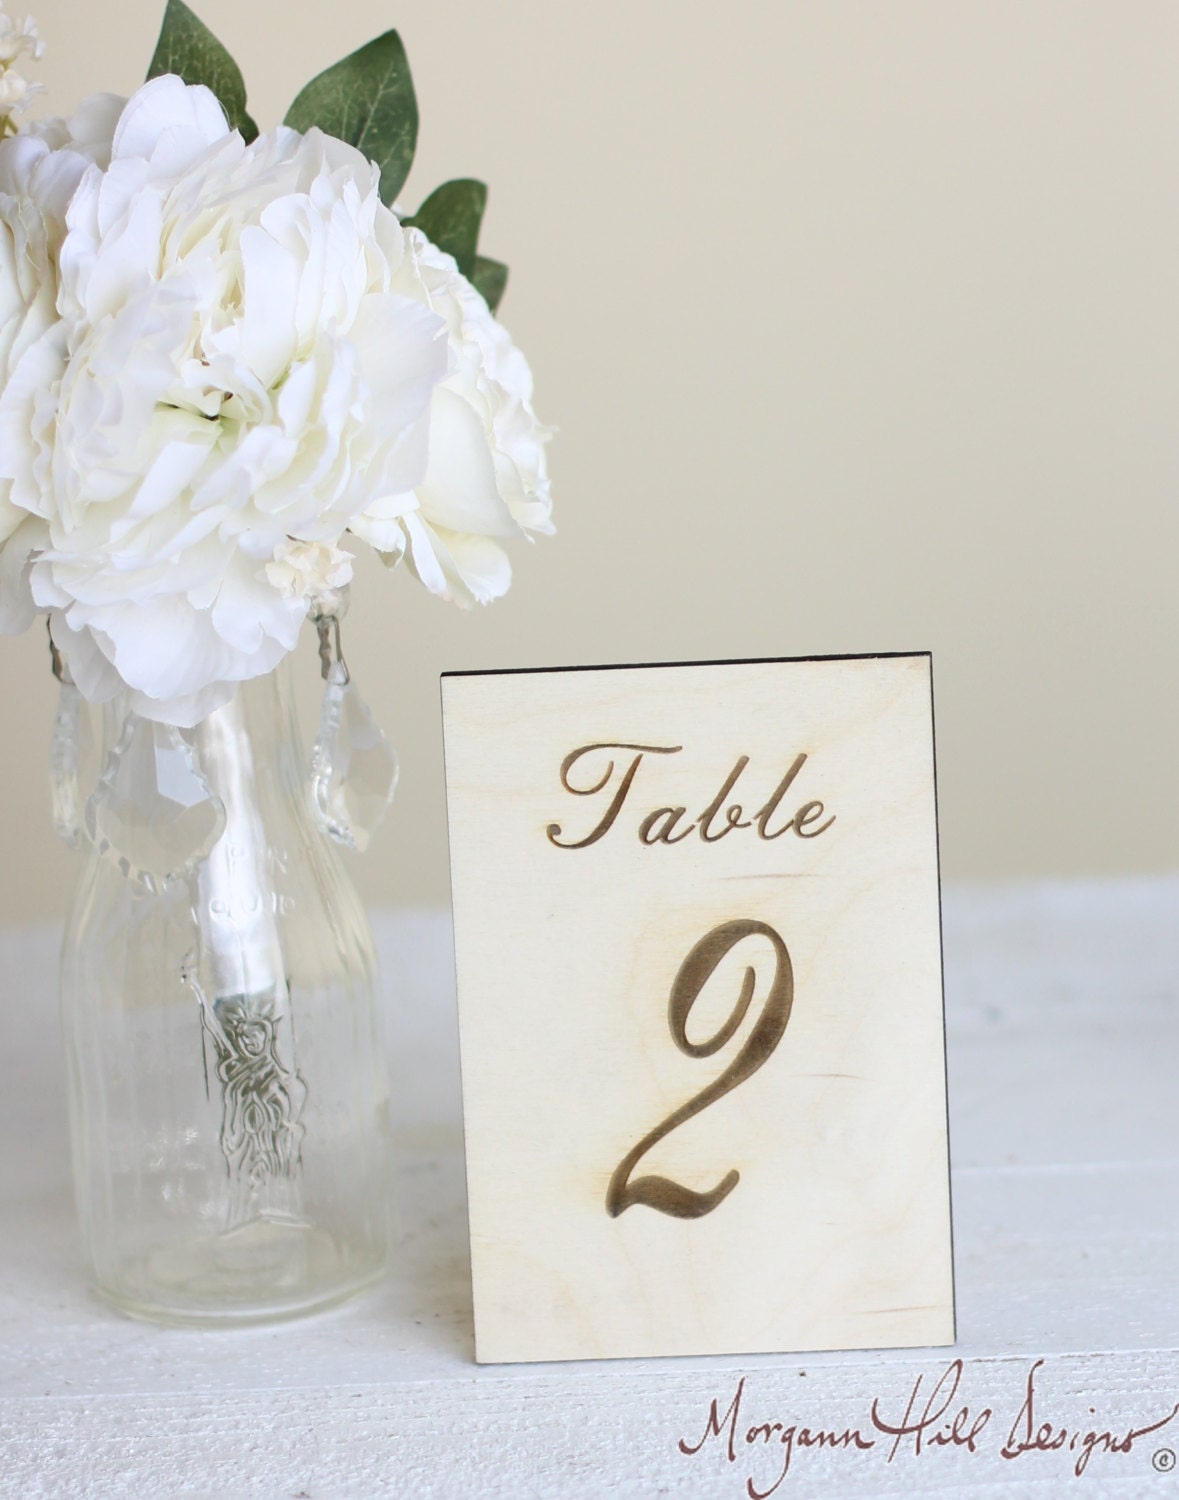 Rustic Table Numbers Engraved Wood Country Barn Wedding Decor Signs (Item Number MHD20230)